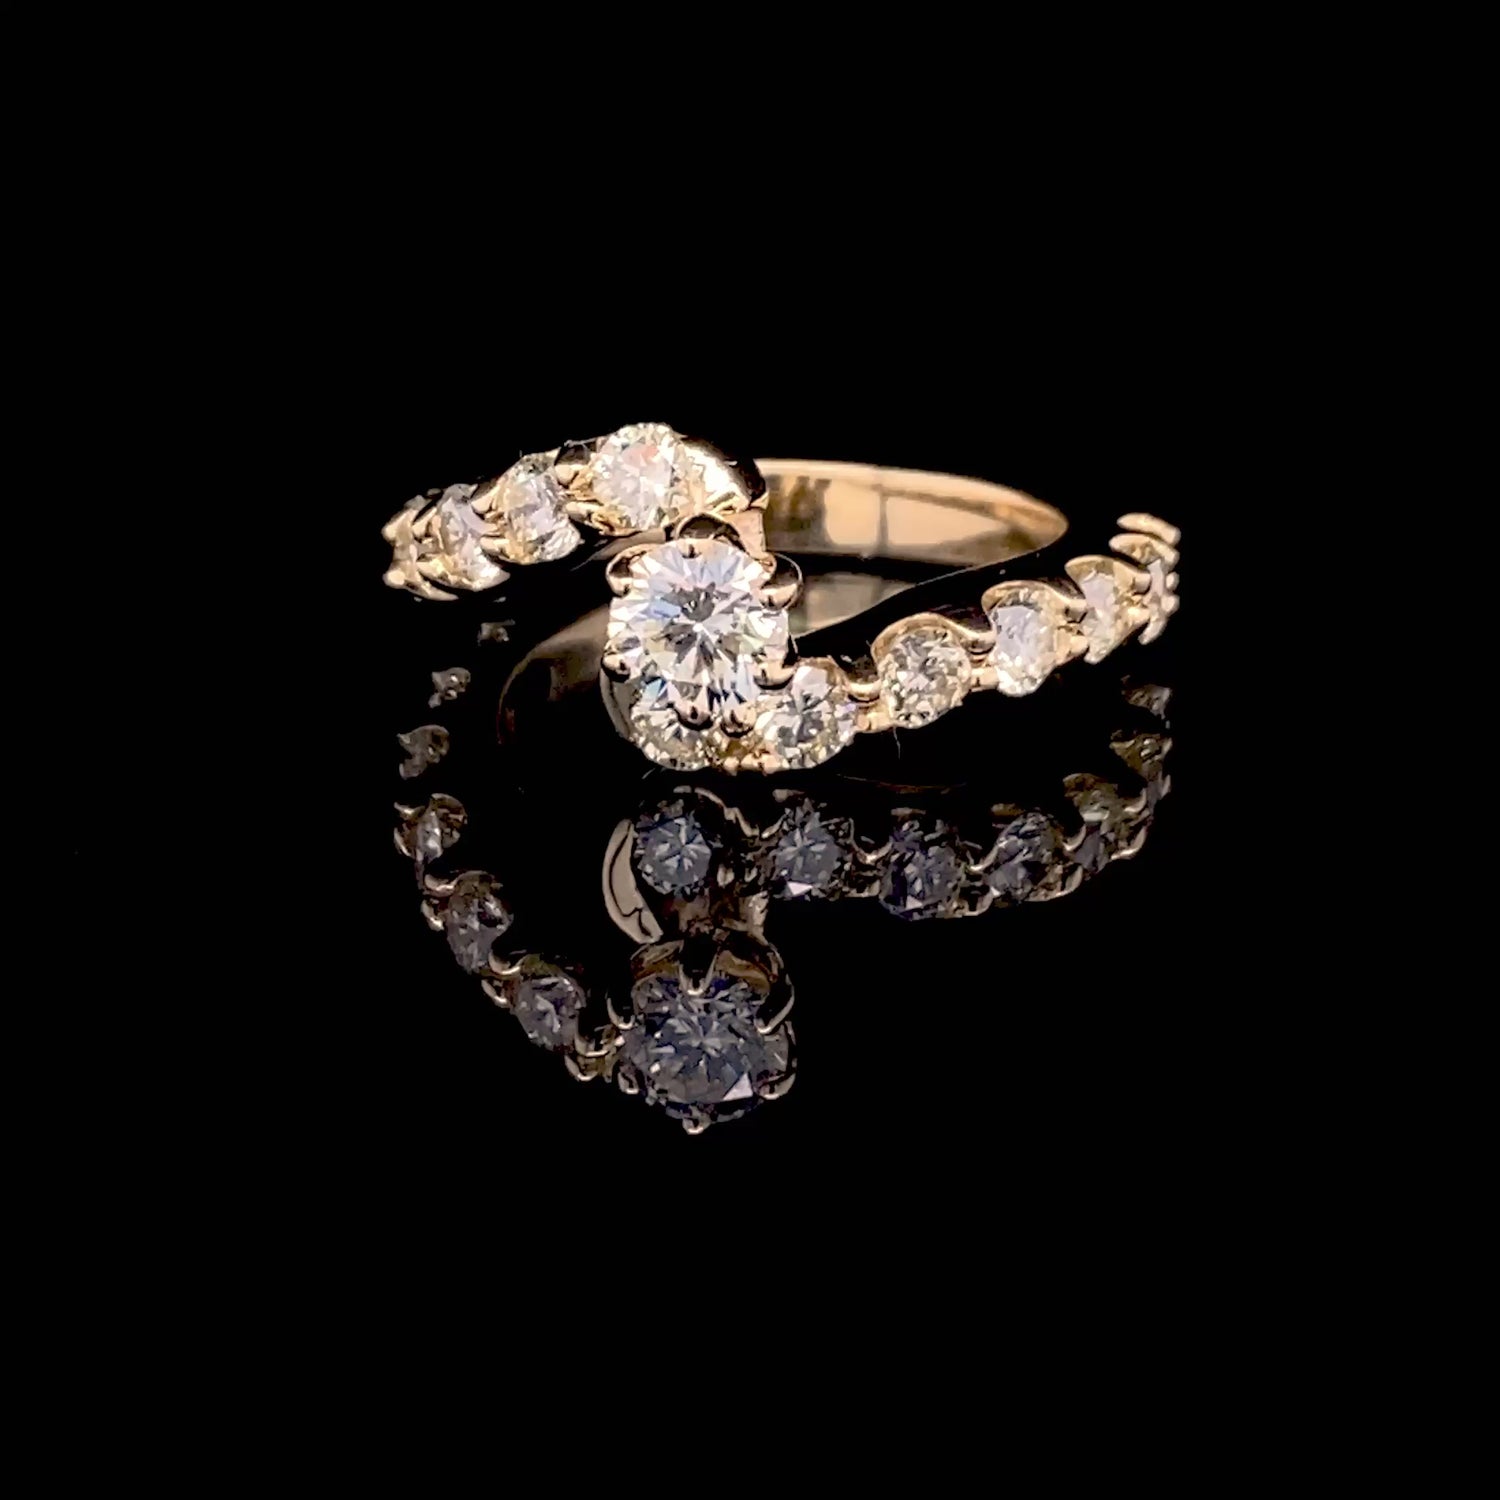 Luxurious 1.65CT Round Cut Diamond Engagement Ring in 18KT Yellow Gold